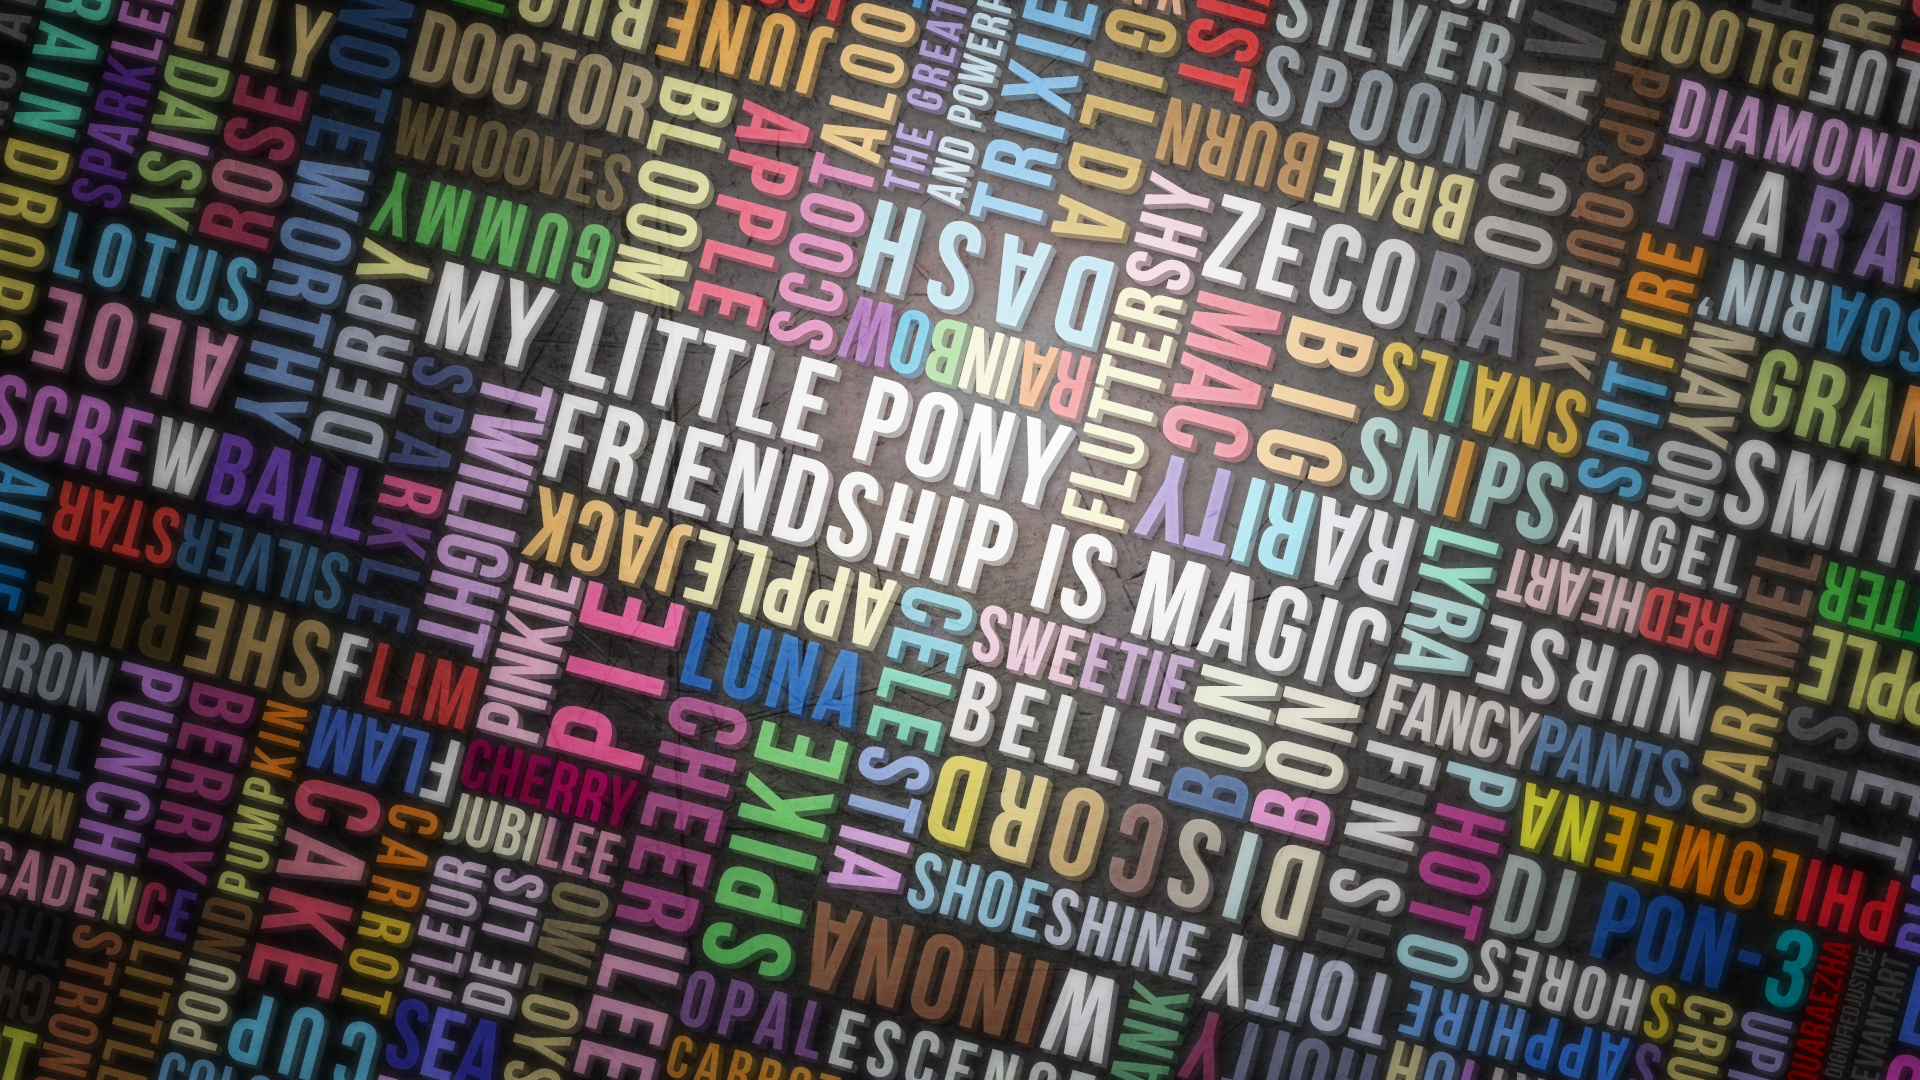 Mural My Little Pony Typography Colors 1920x1080